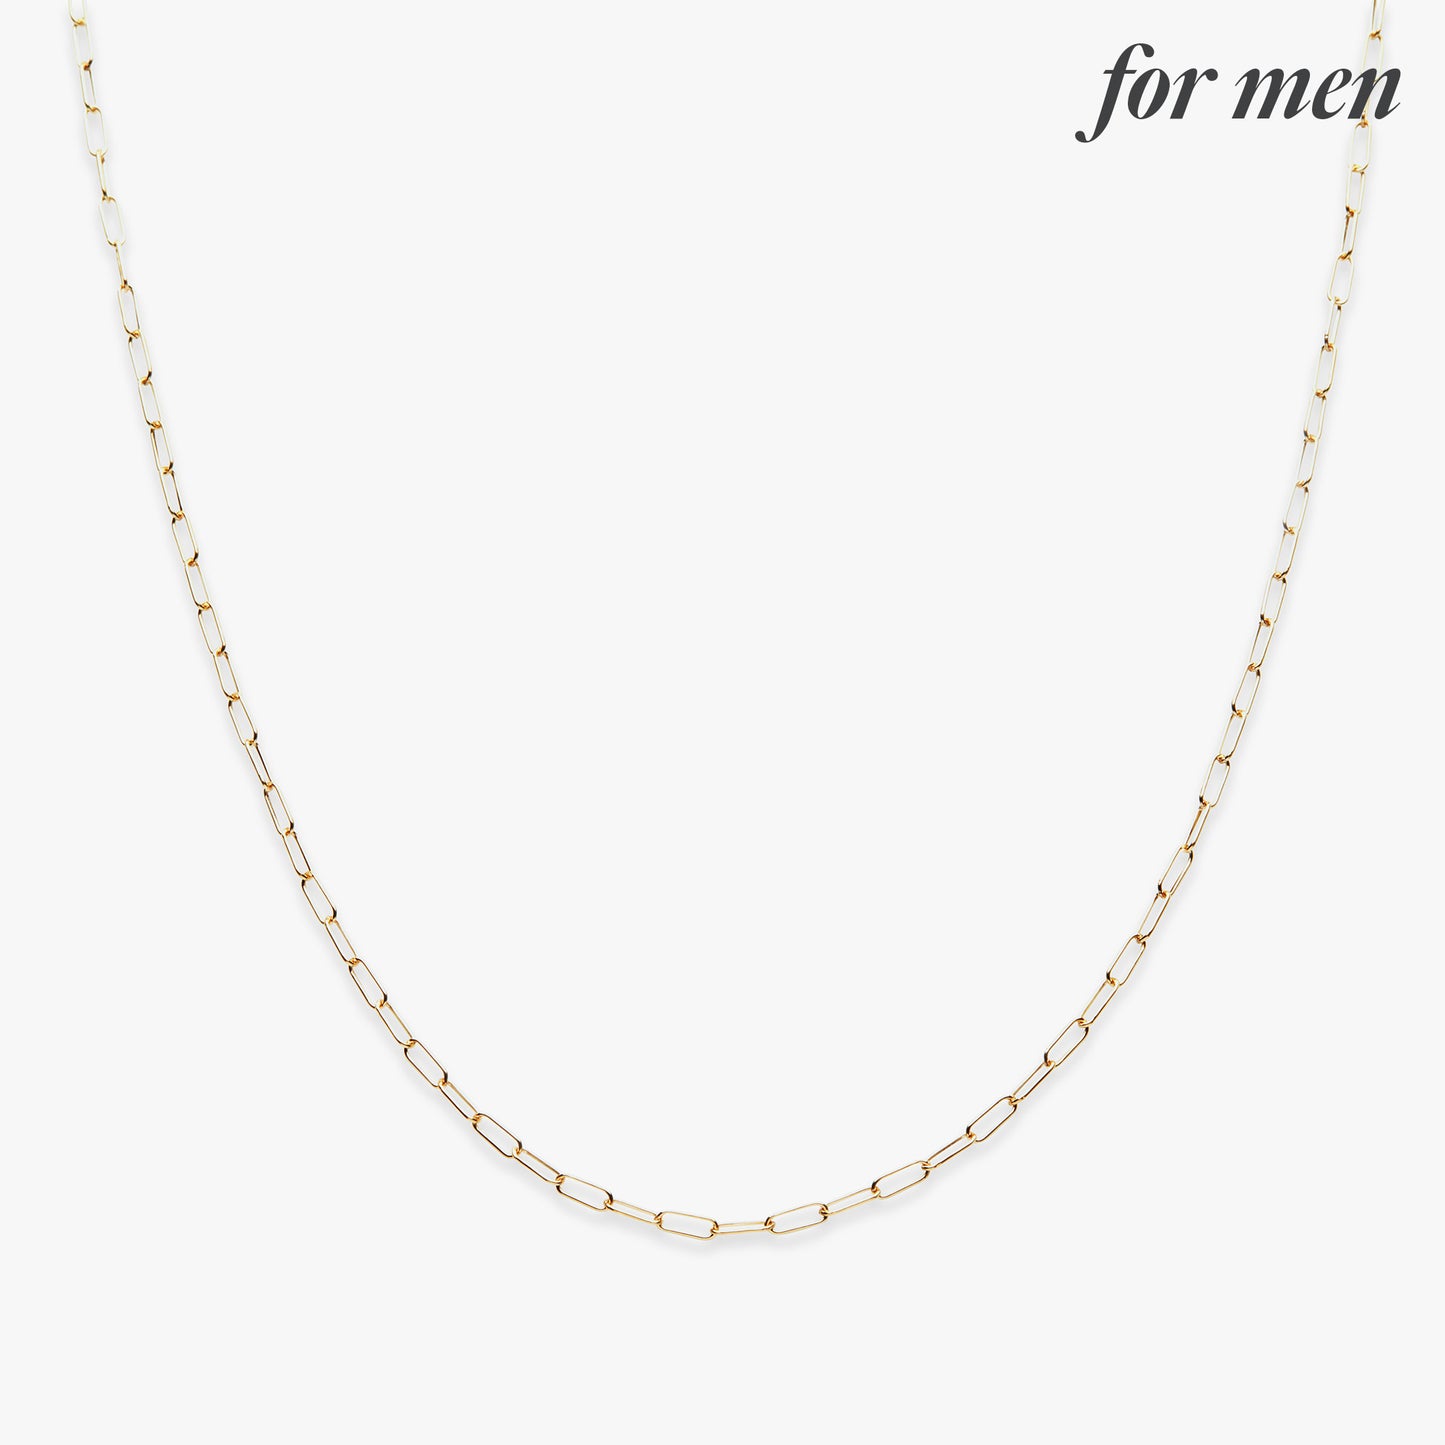 Paperclip ketting gold filled voor mannen